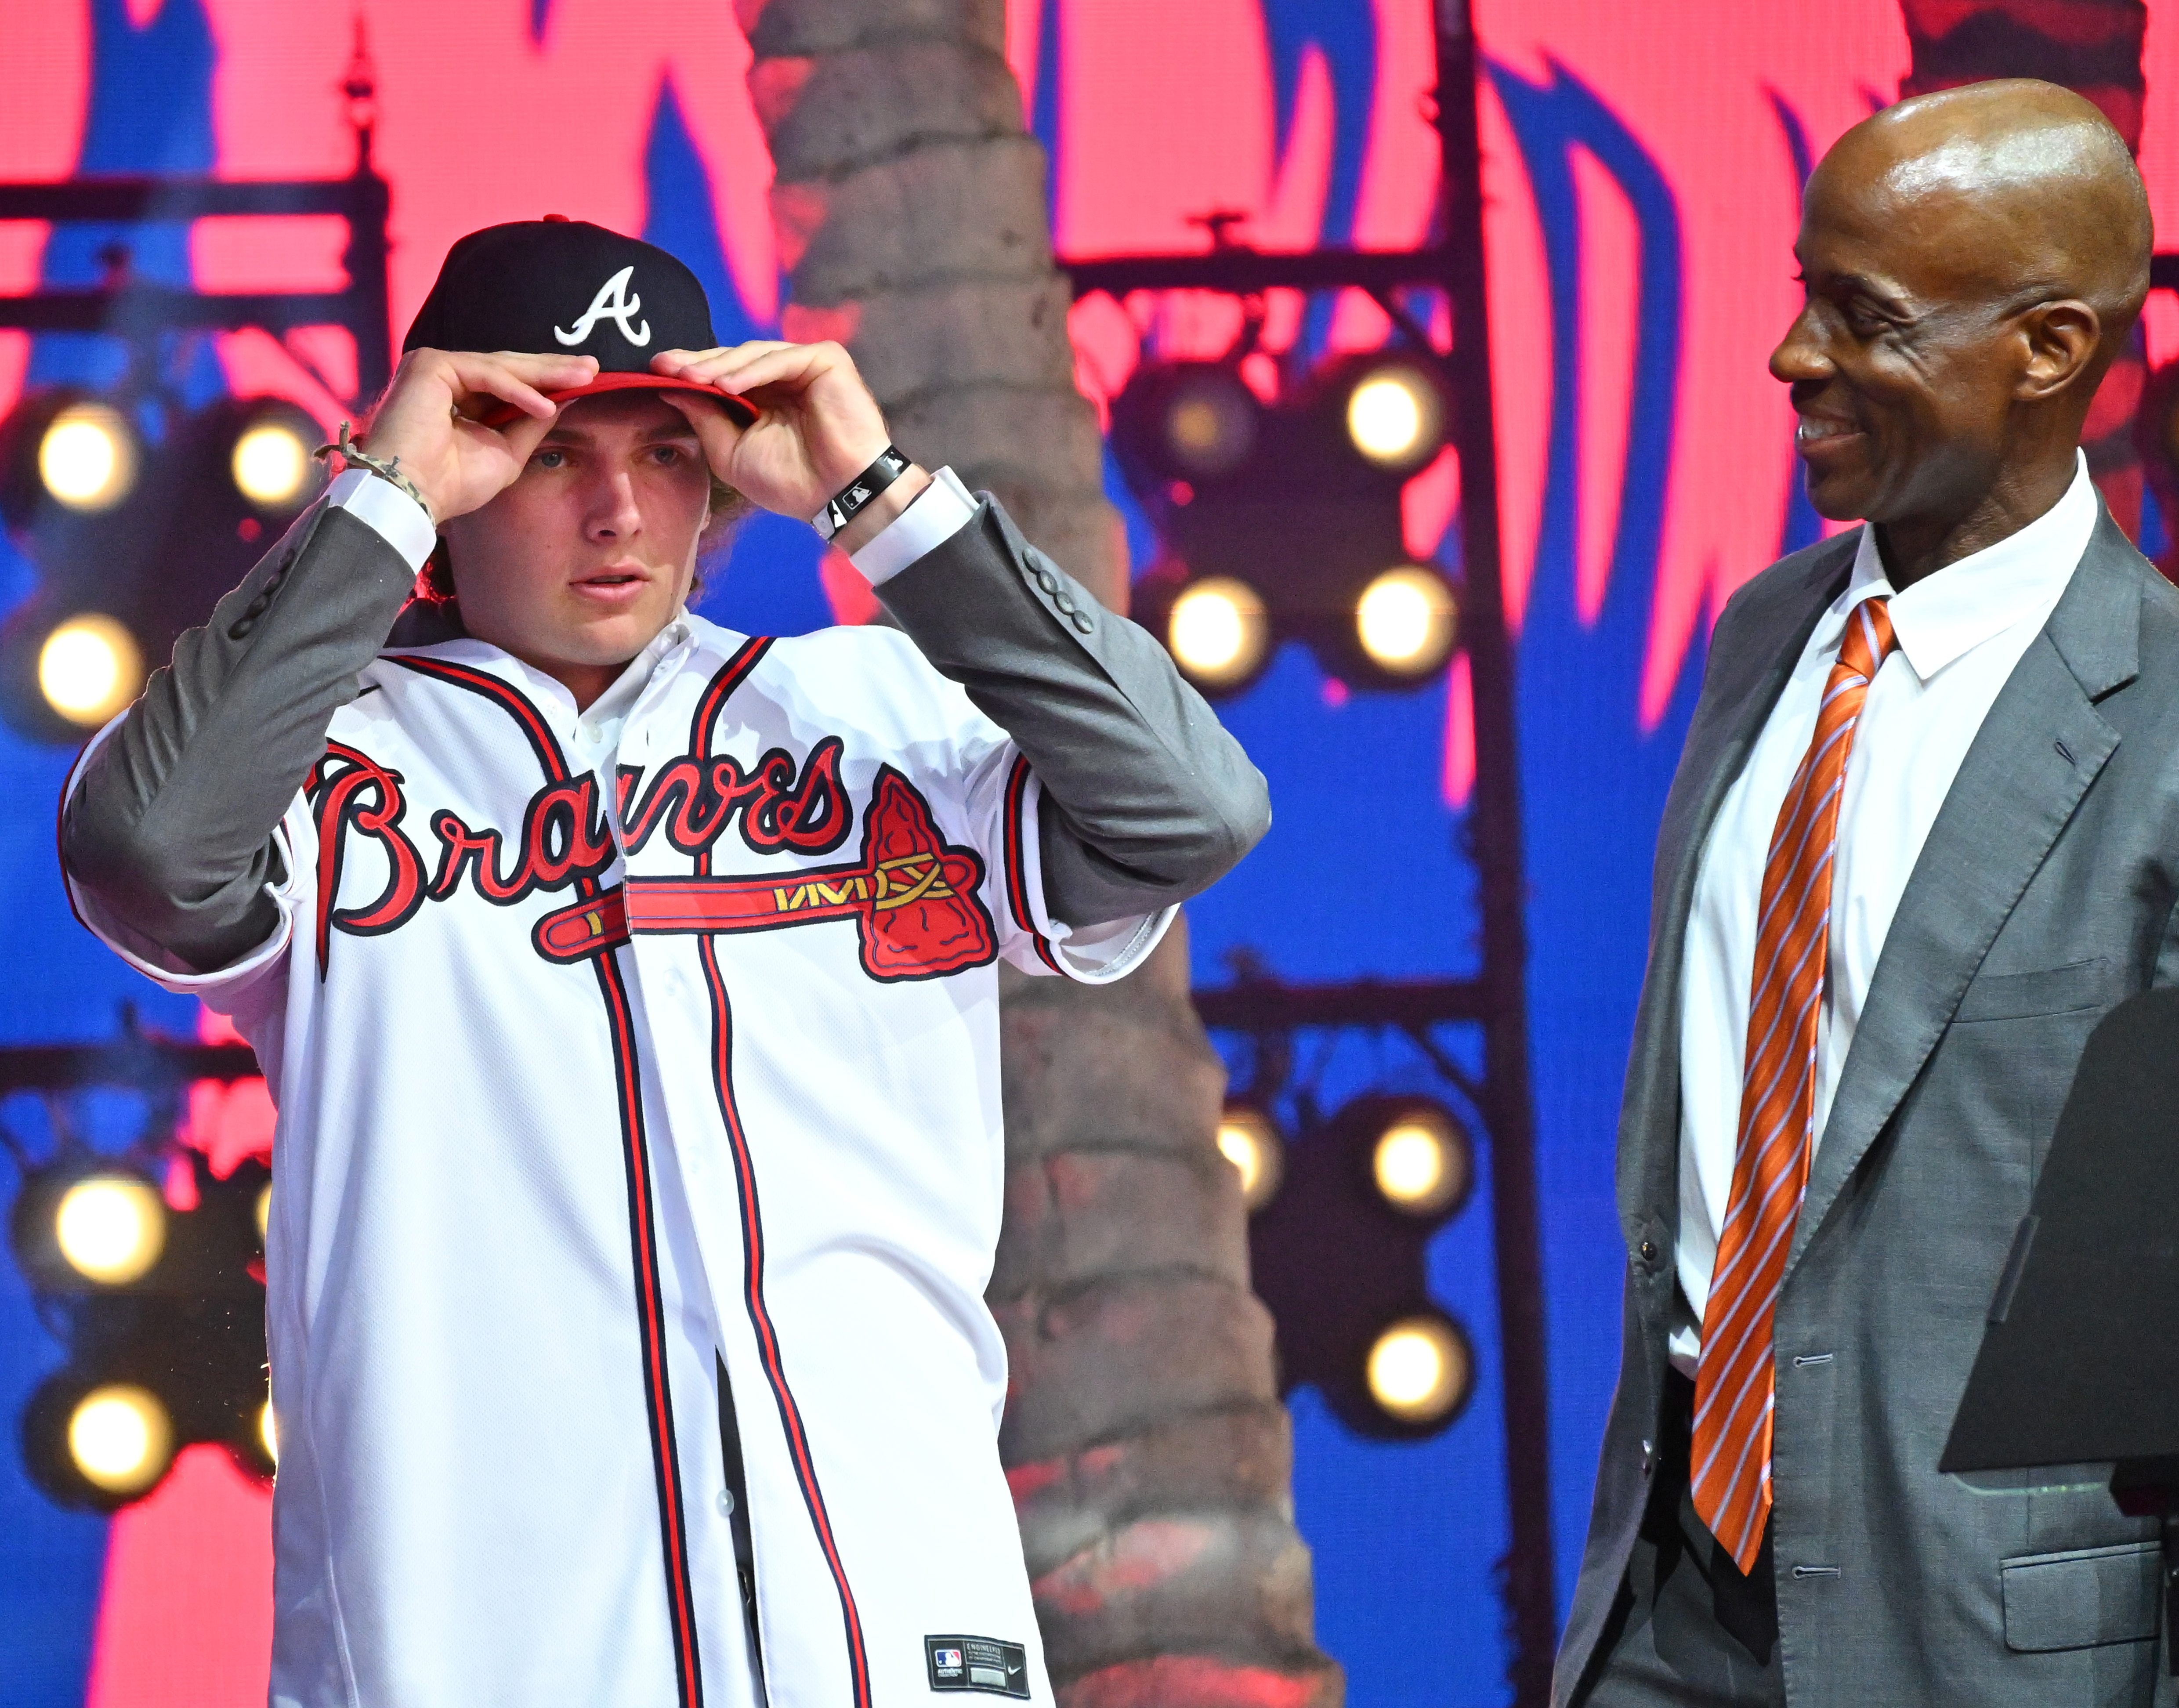 Jul 17, 2022; Los Angeles, CA, USA; Former Atlanta Braves player Fred McGriff presents JR Ritchie right with his jersey after he was selected by the Atlanta Braves as the 35th pick of the MLB draft at Xbox Plaza at LA Live.